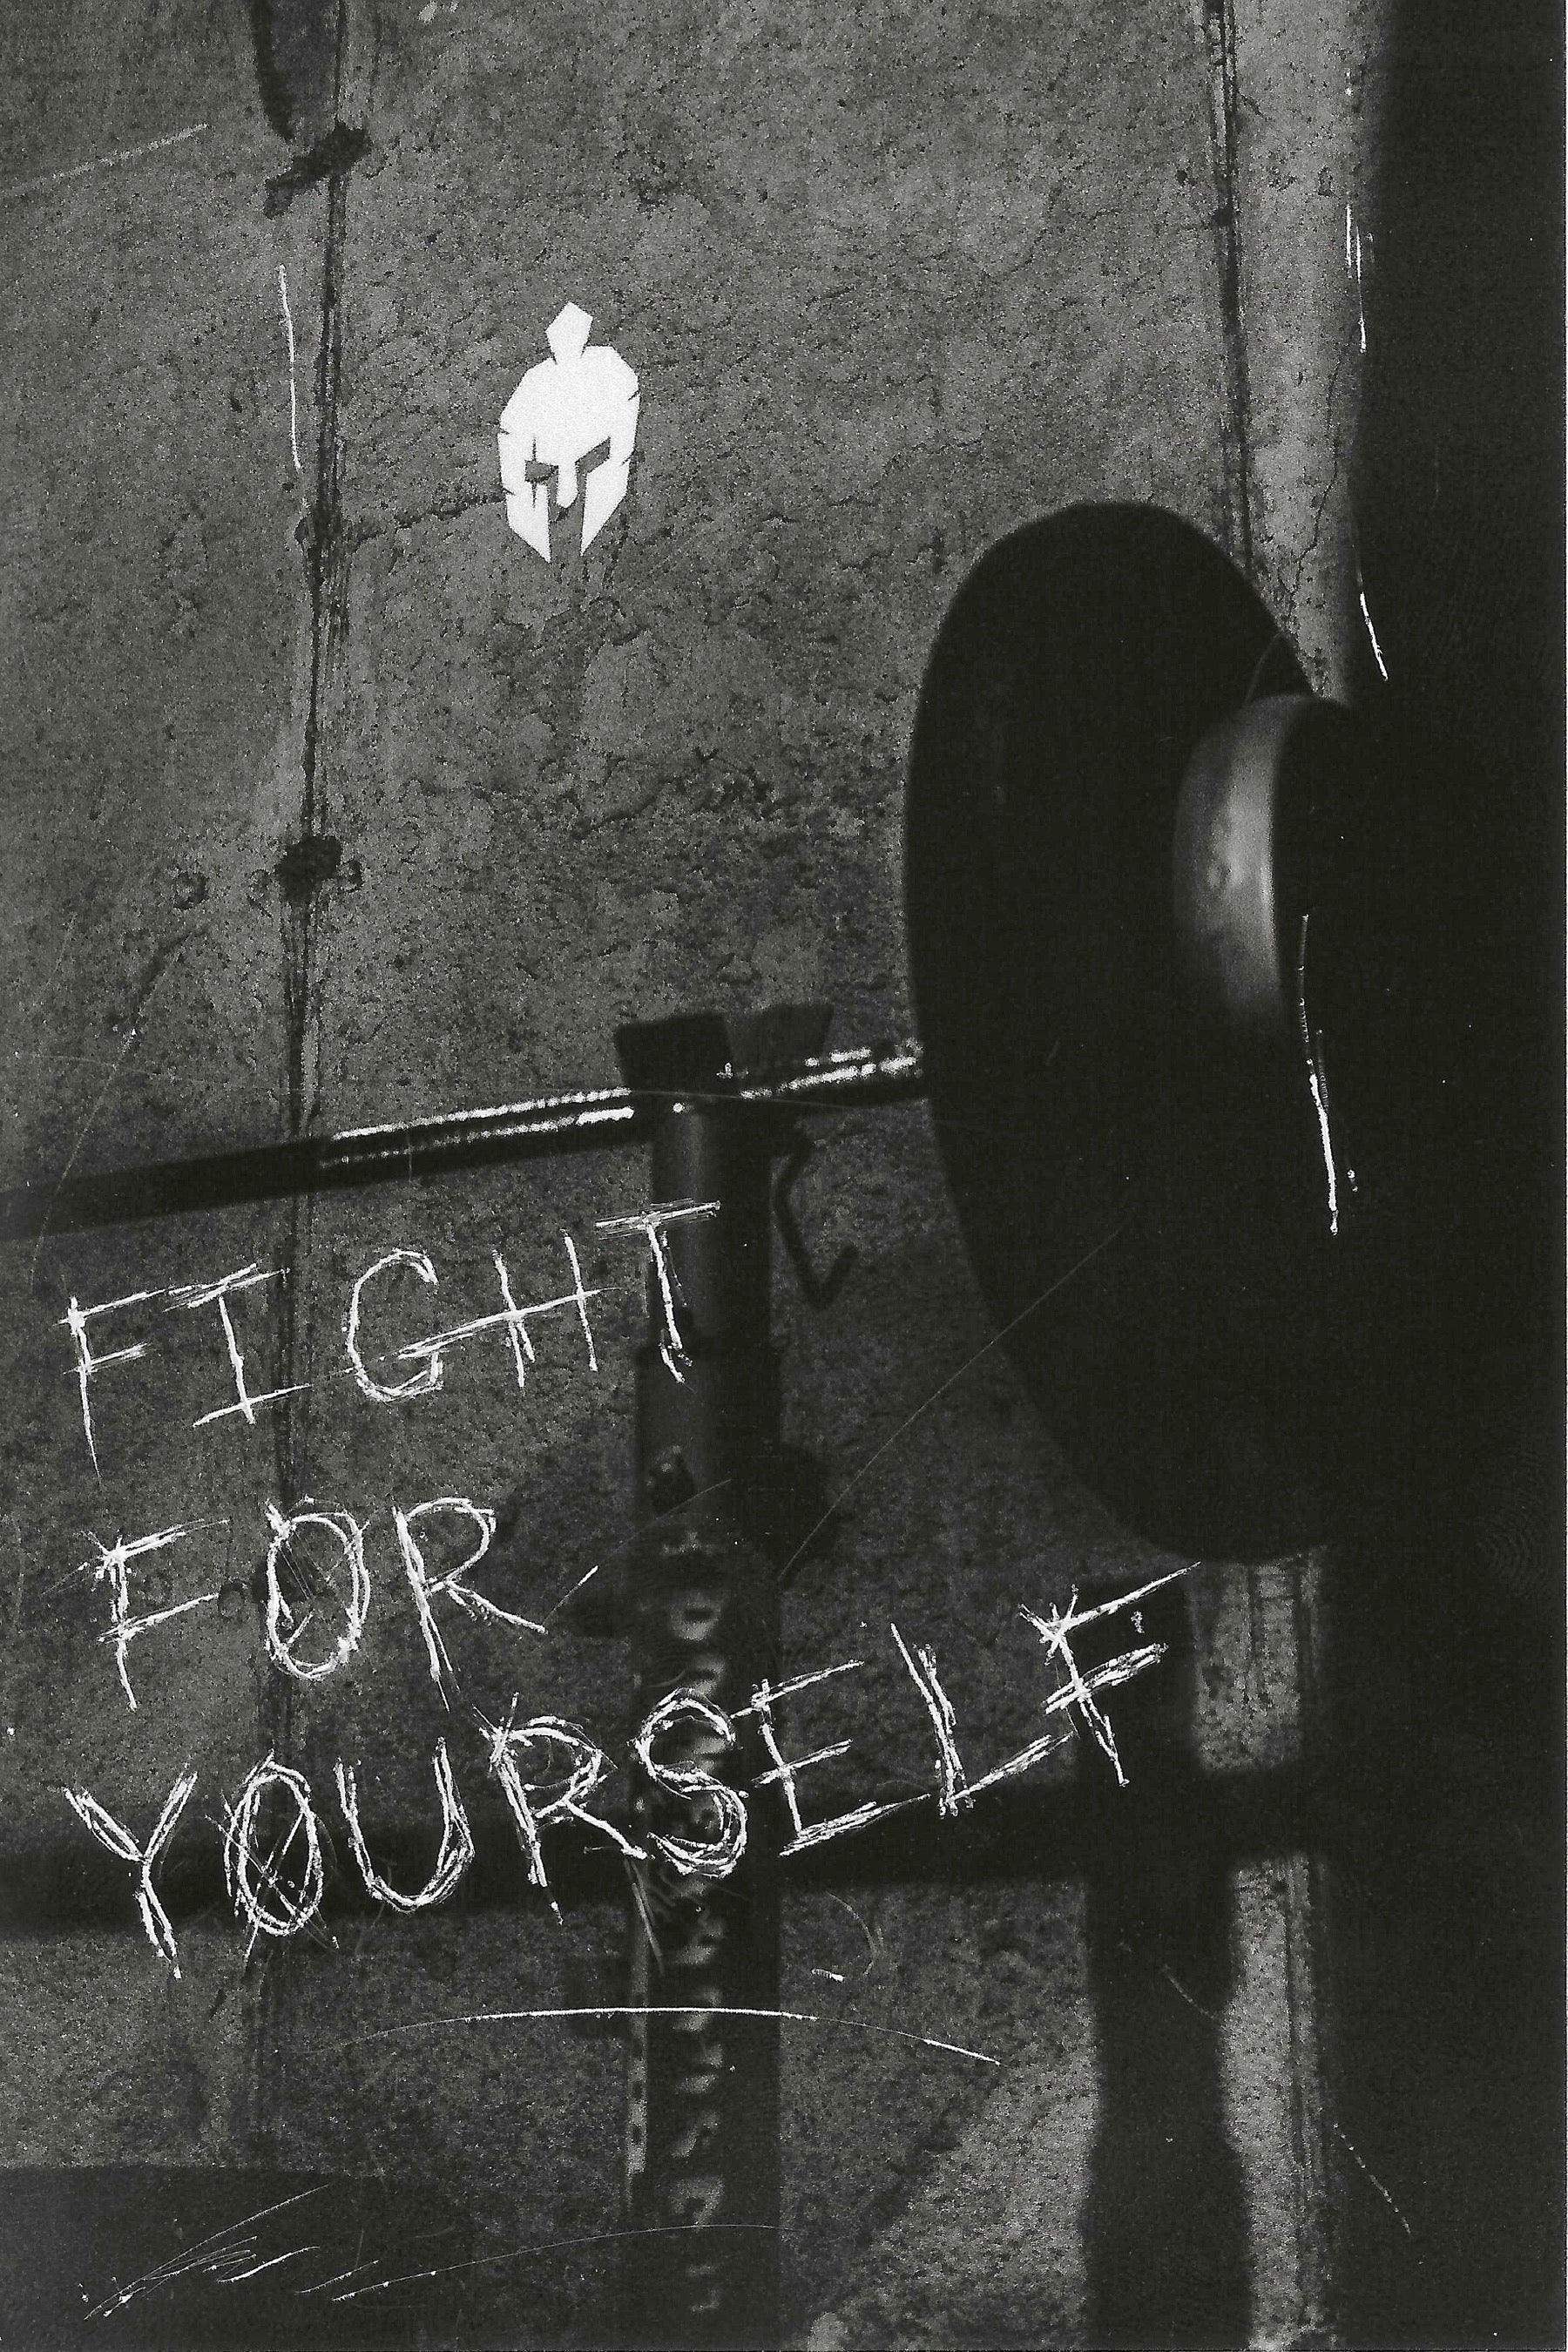 FIGHT FOR YOURSELF